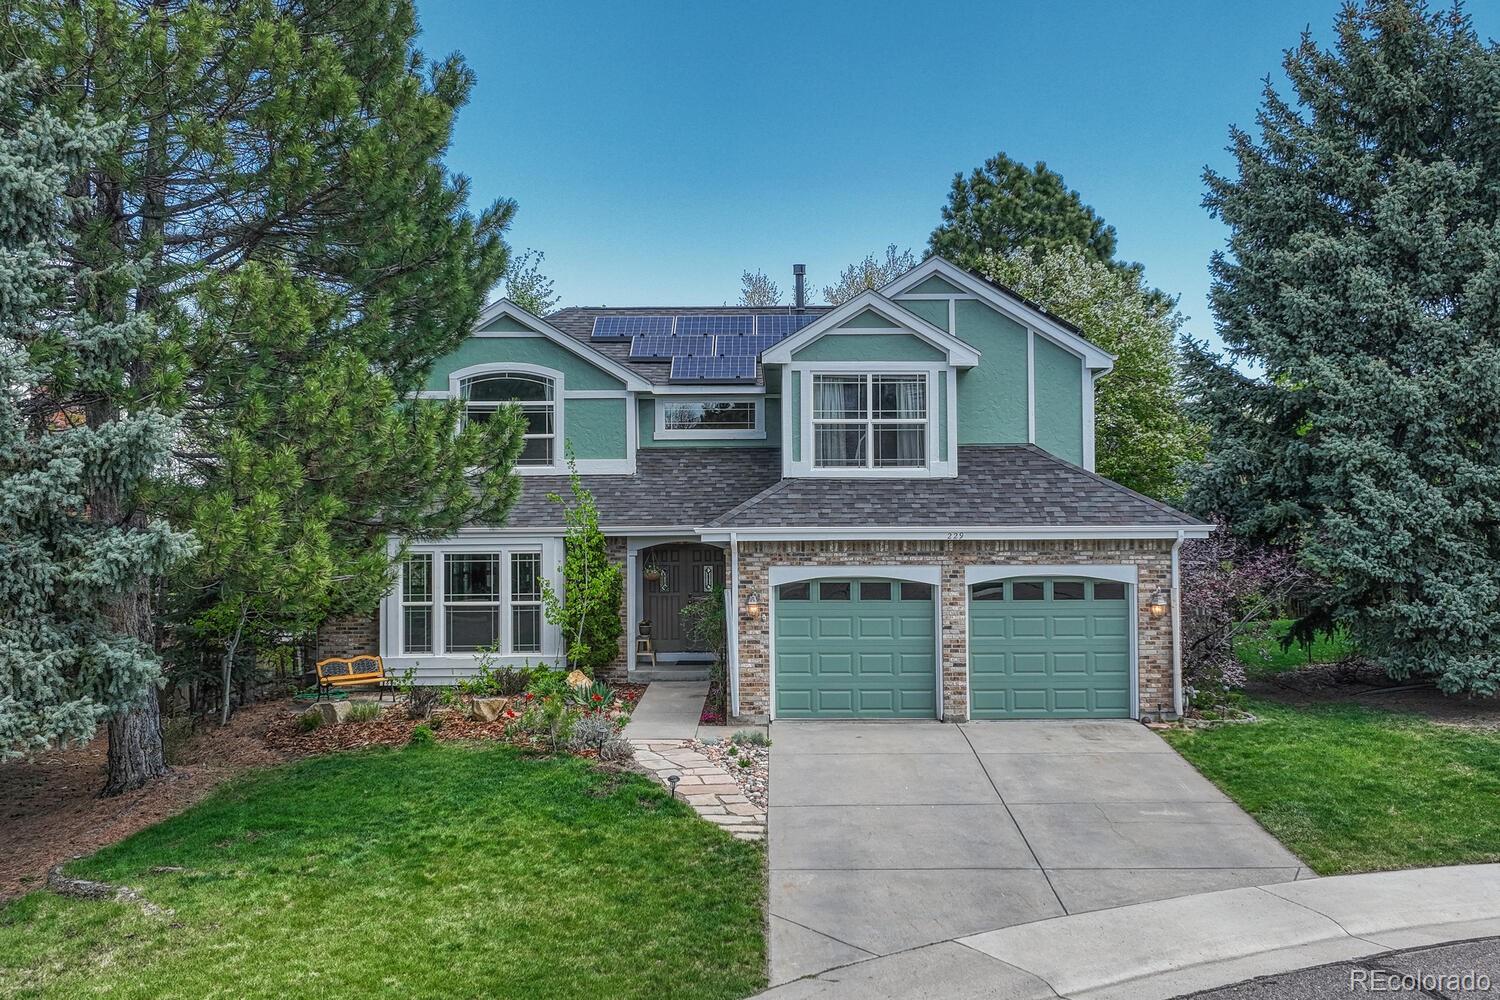 229  Corby Court, castle pines MLS: 3546124 Beds: 4 Baths: 3 Price: $765,000